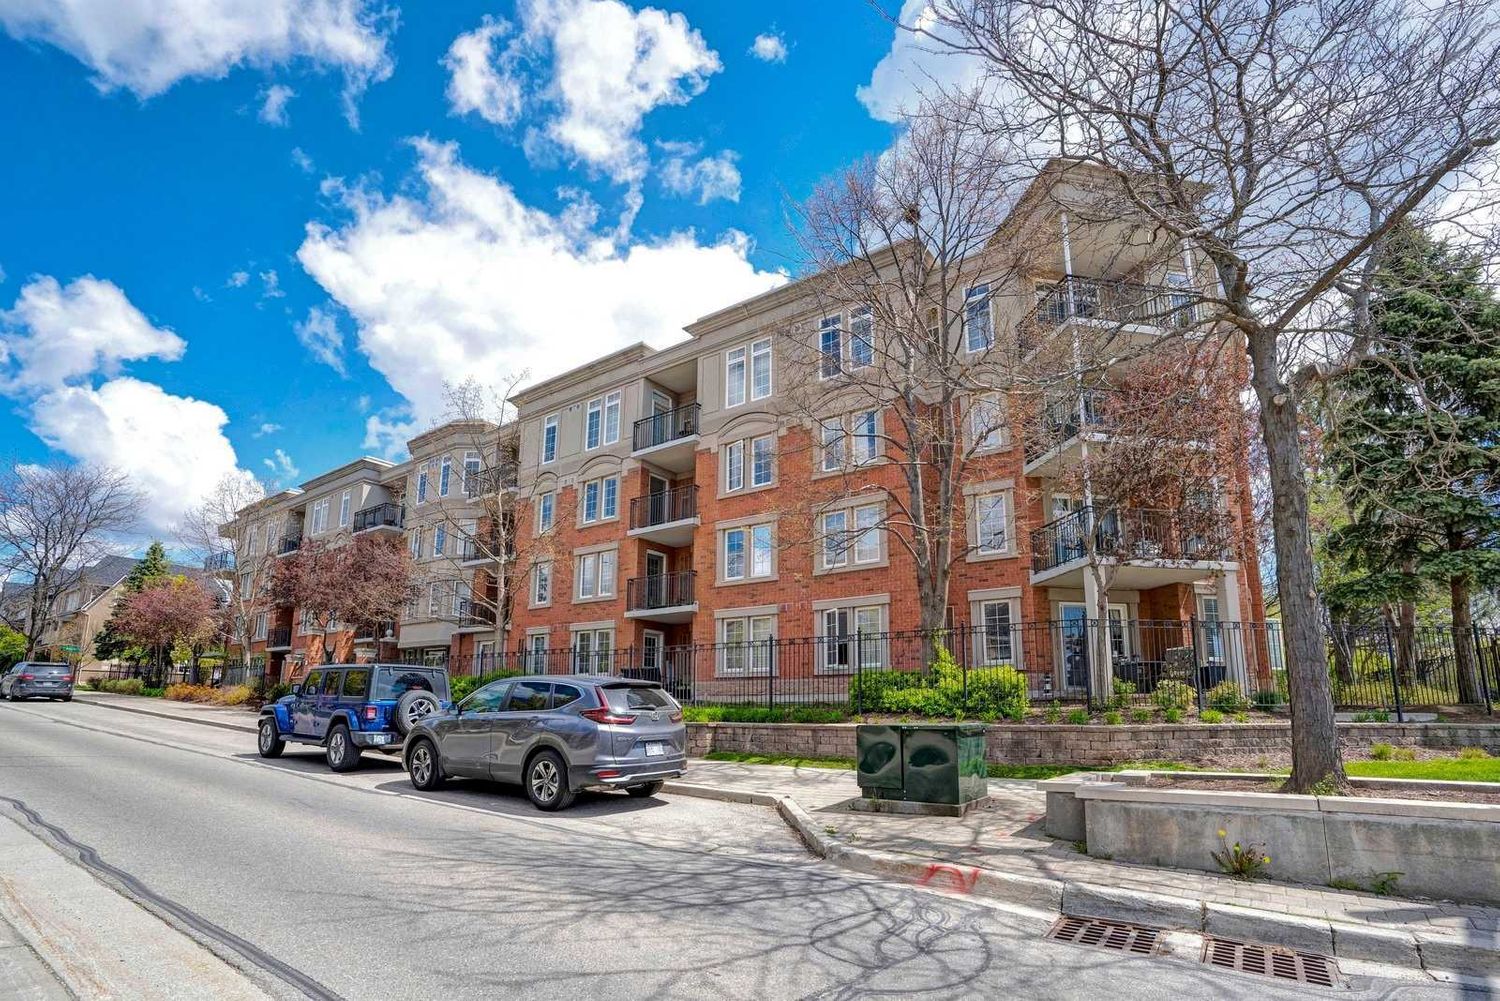 2301 Parkhaven Boulevard. Park Place I Condos is located in  Oakville, Toronto - image #2 of 2